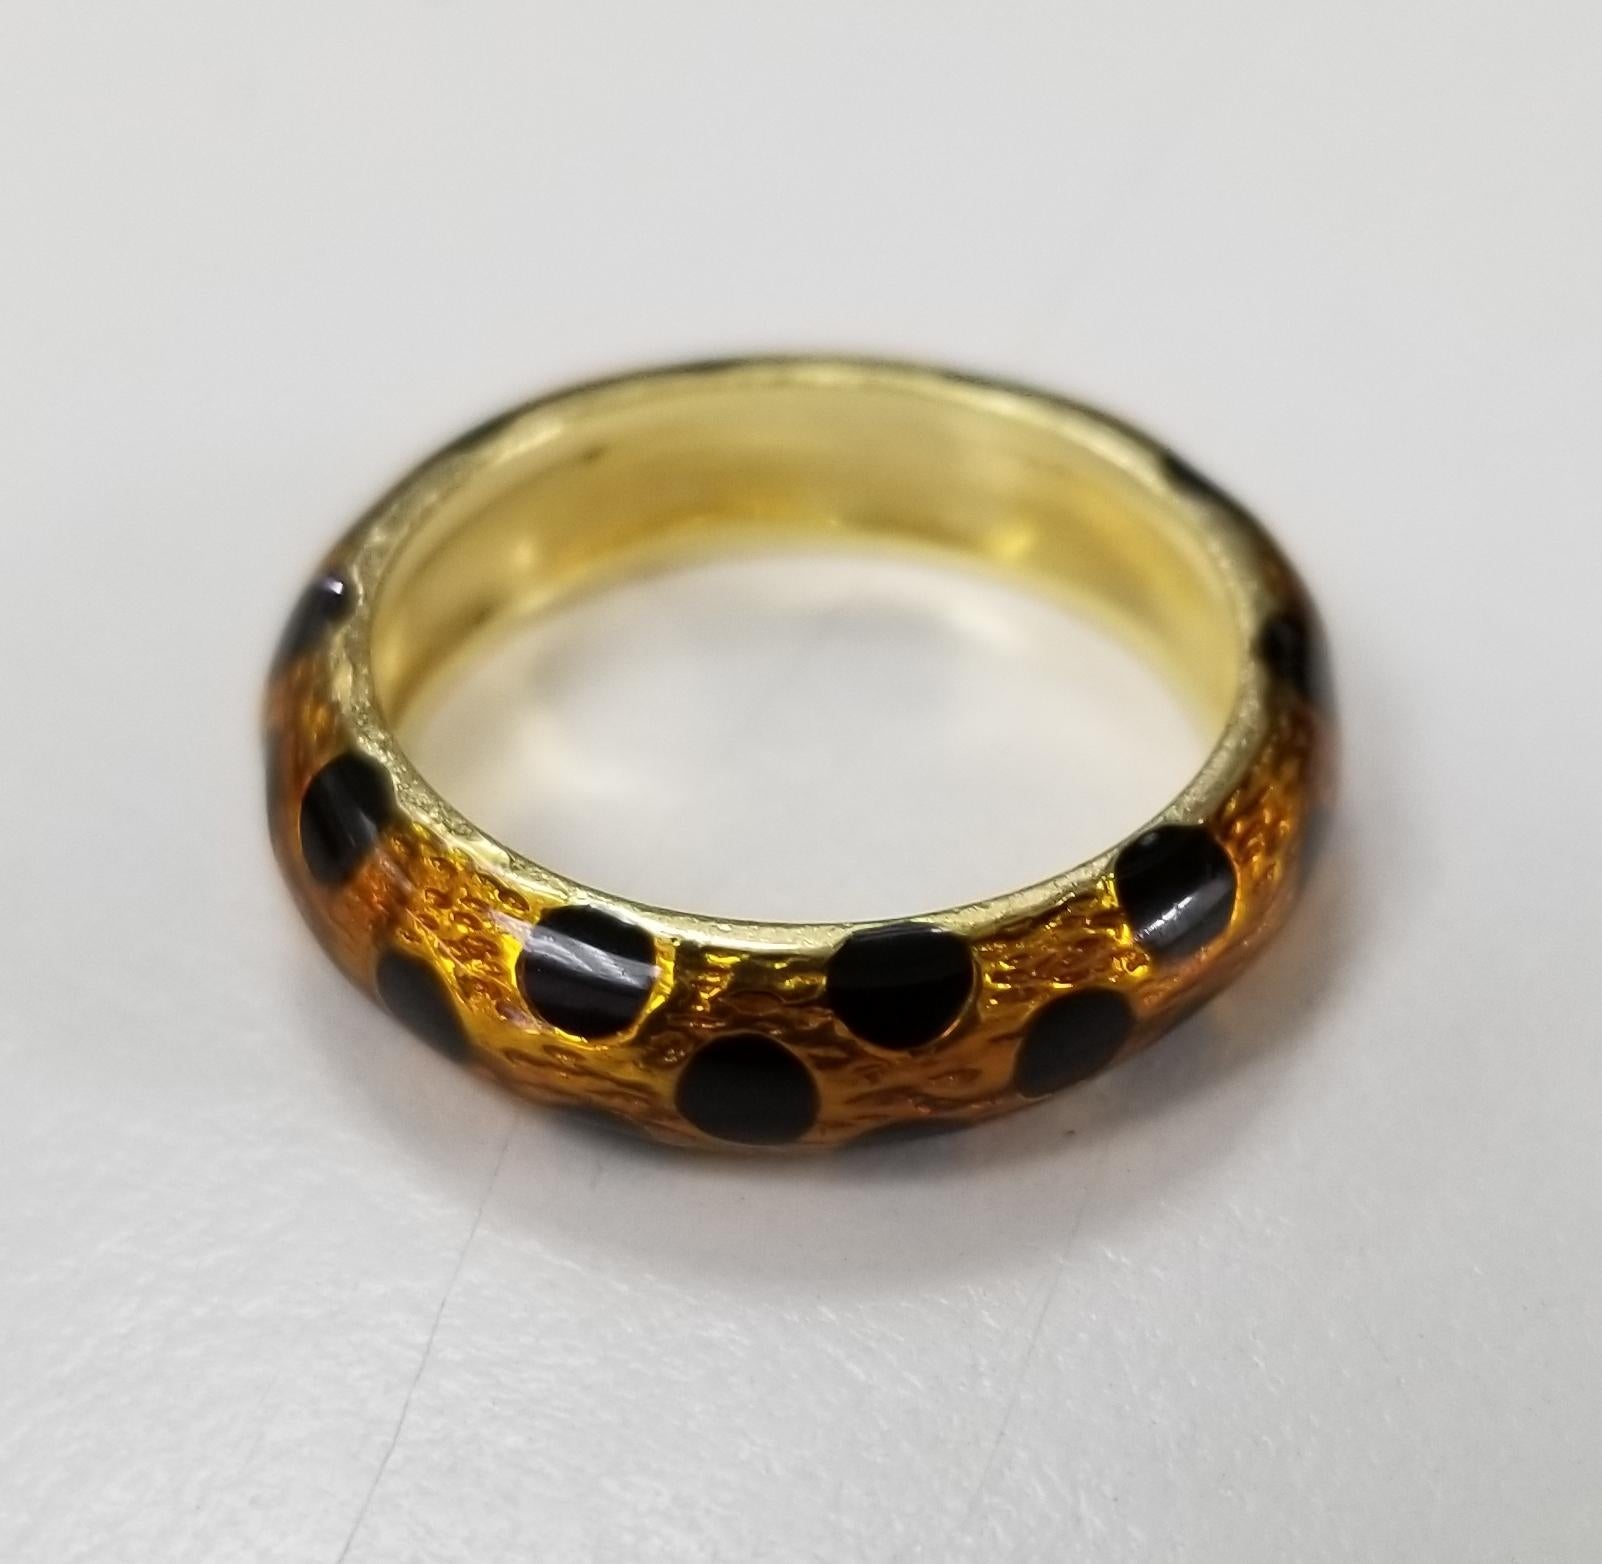 Hidalgo 18k yellow gold and enamel ring with orange leopard and black enamel over gold.  ring size is 7 1/4